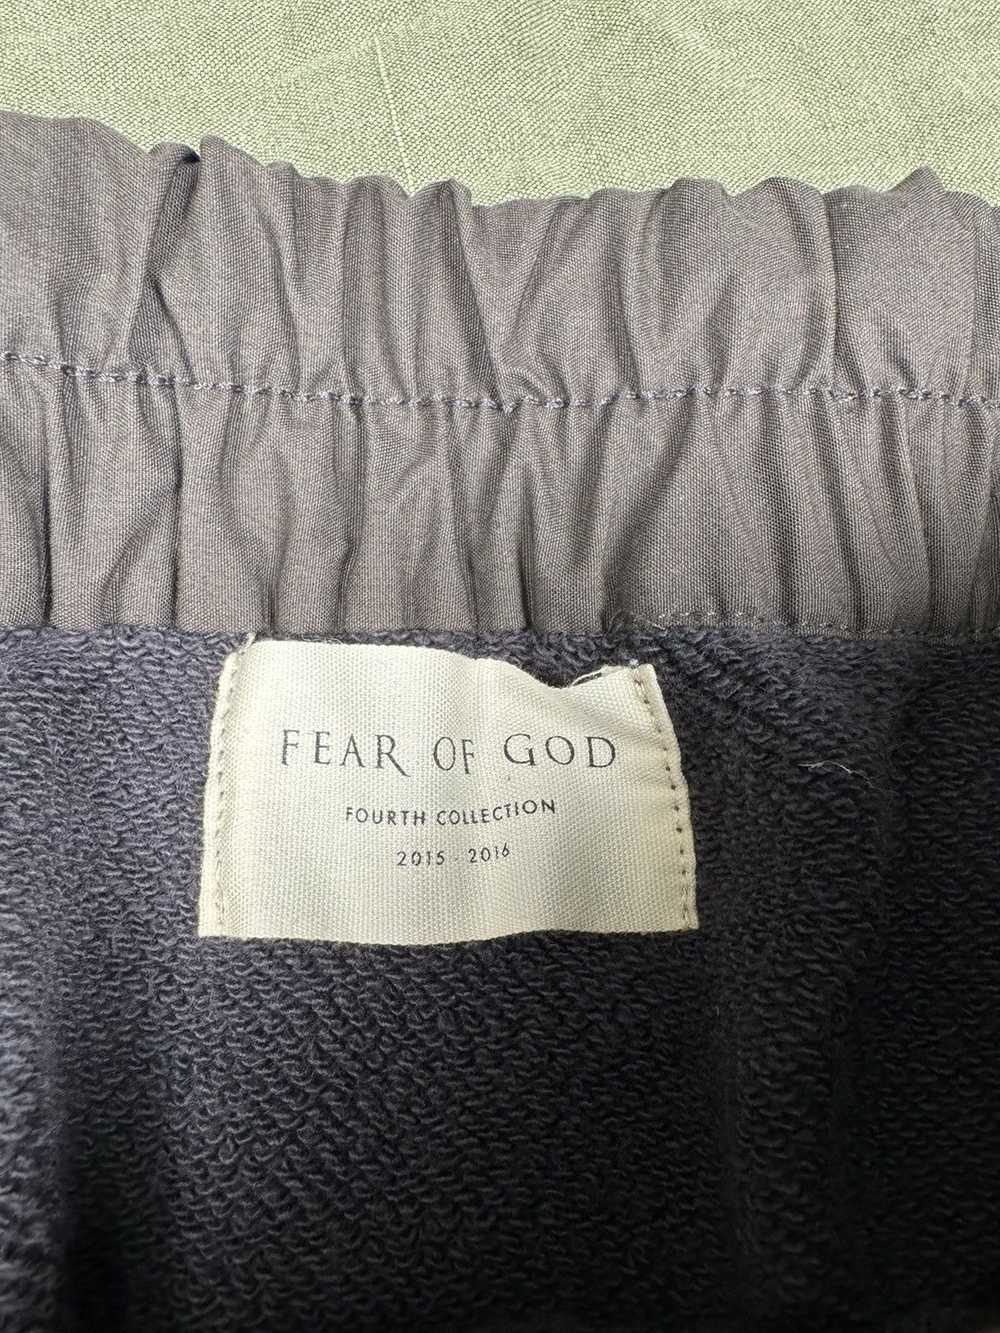 Fear of God 4th Collection Shorts - image 4